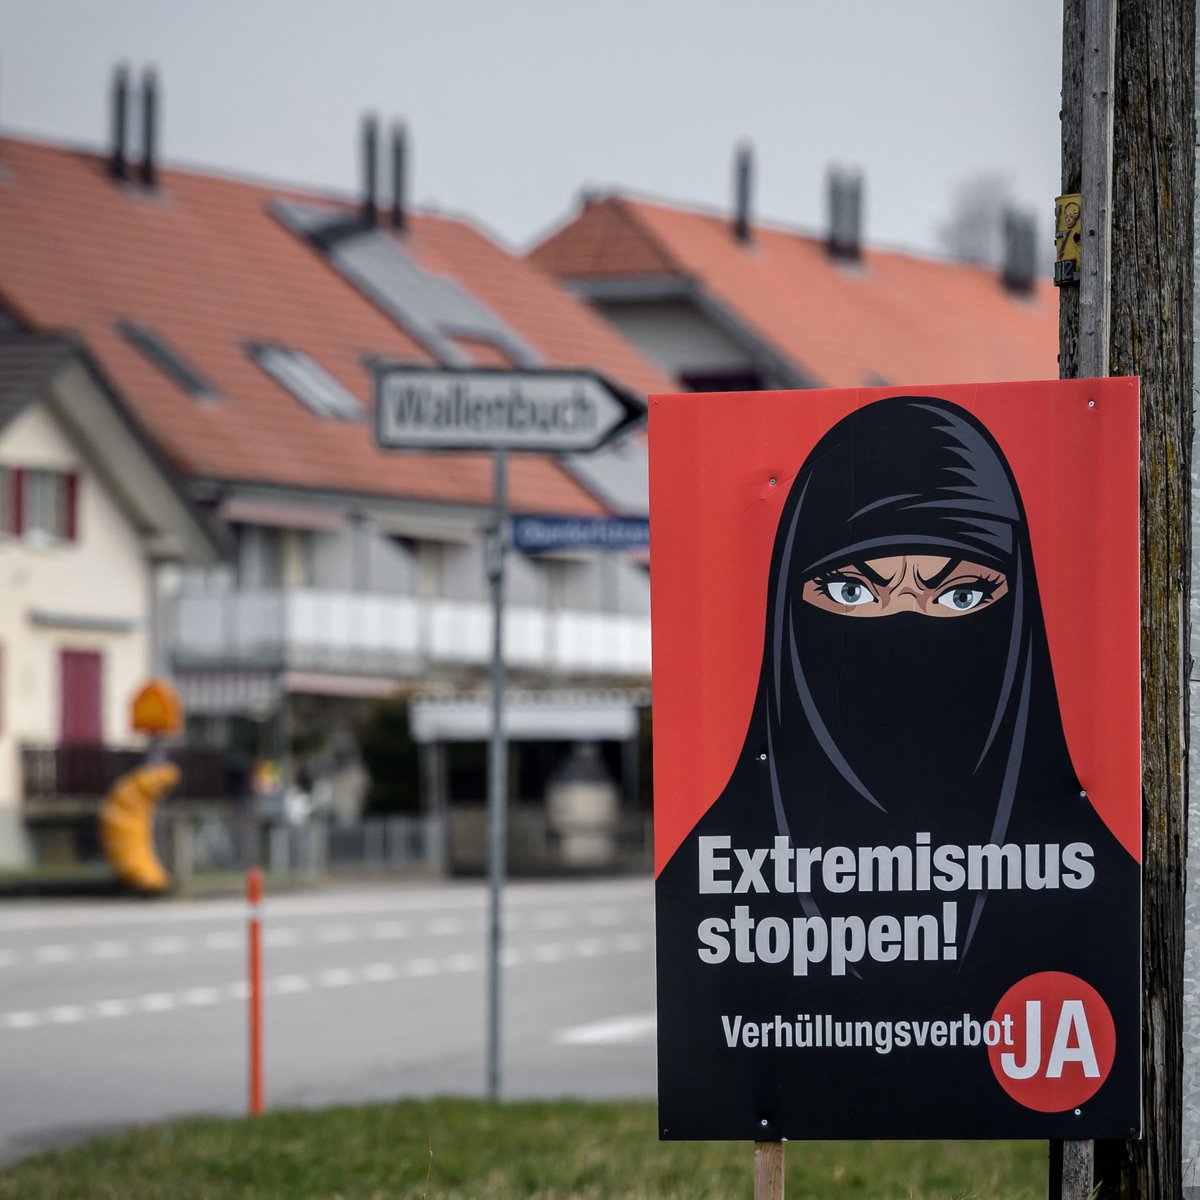 🇨🇭 Switzerland has prohibited the burqa in public spaces through a referendum and declined to recognize Islam as an official religion.